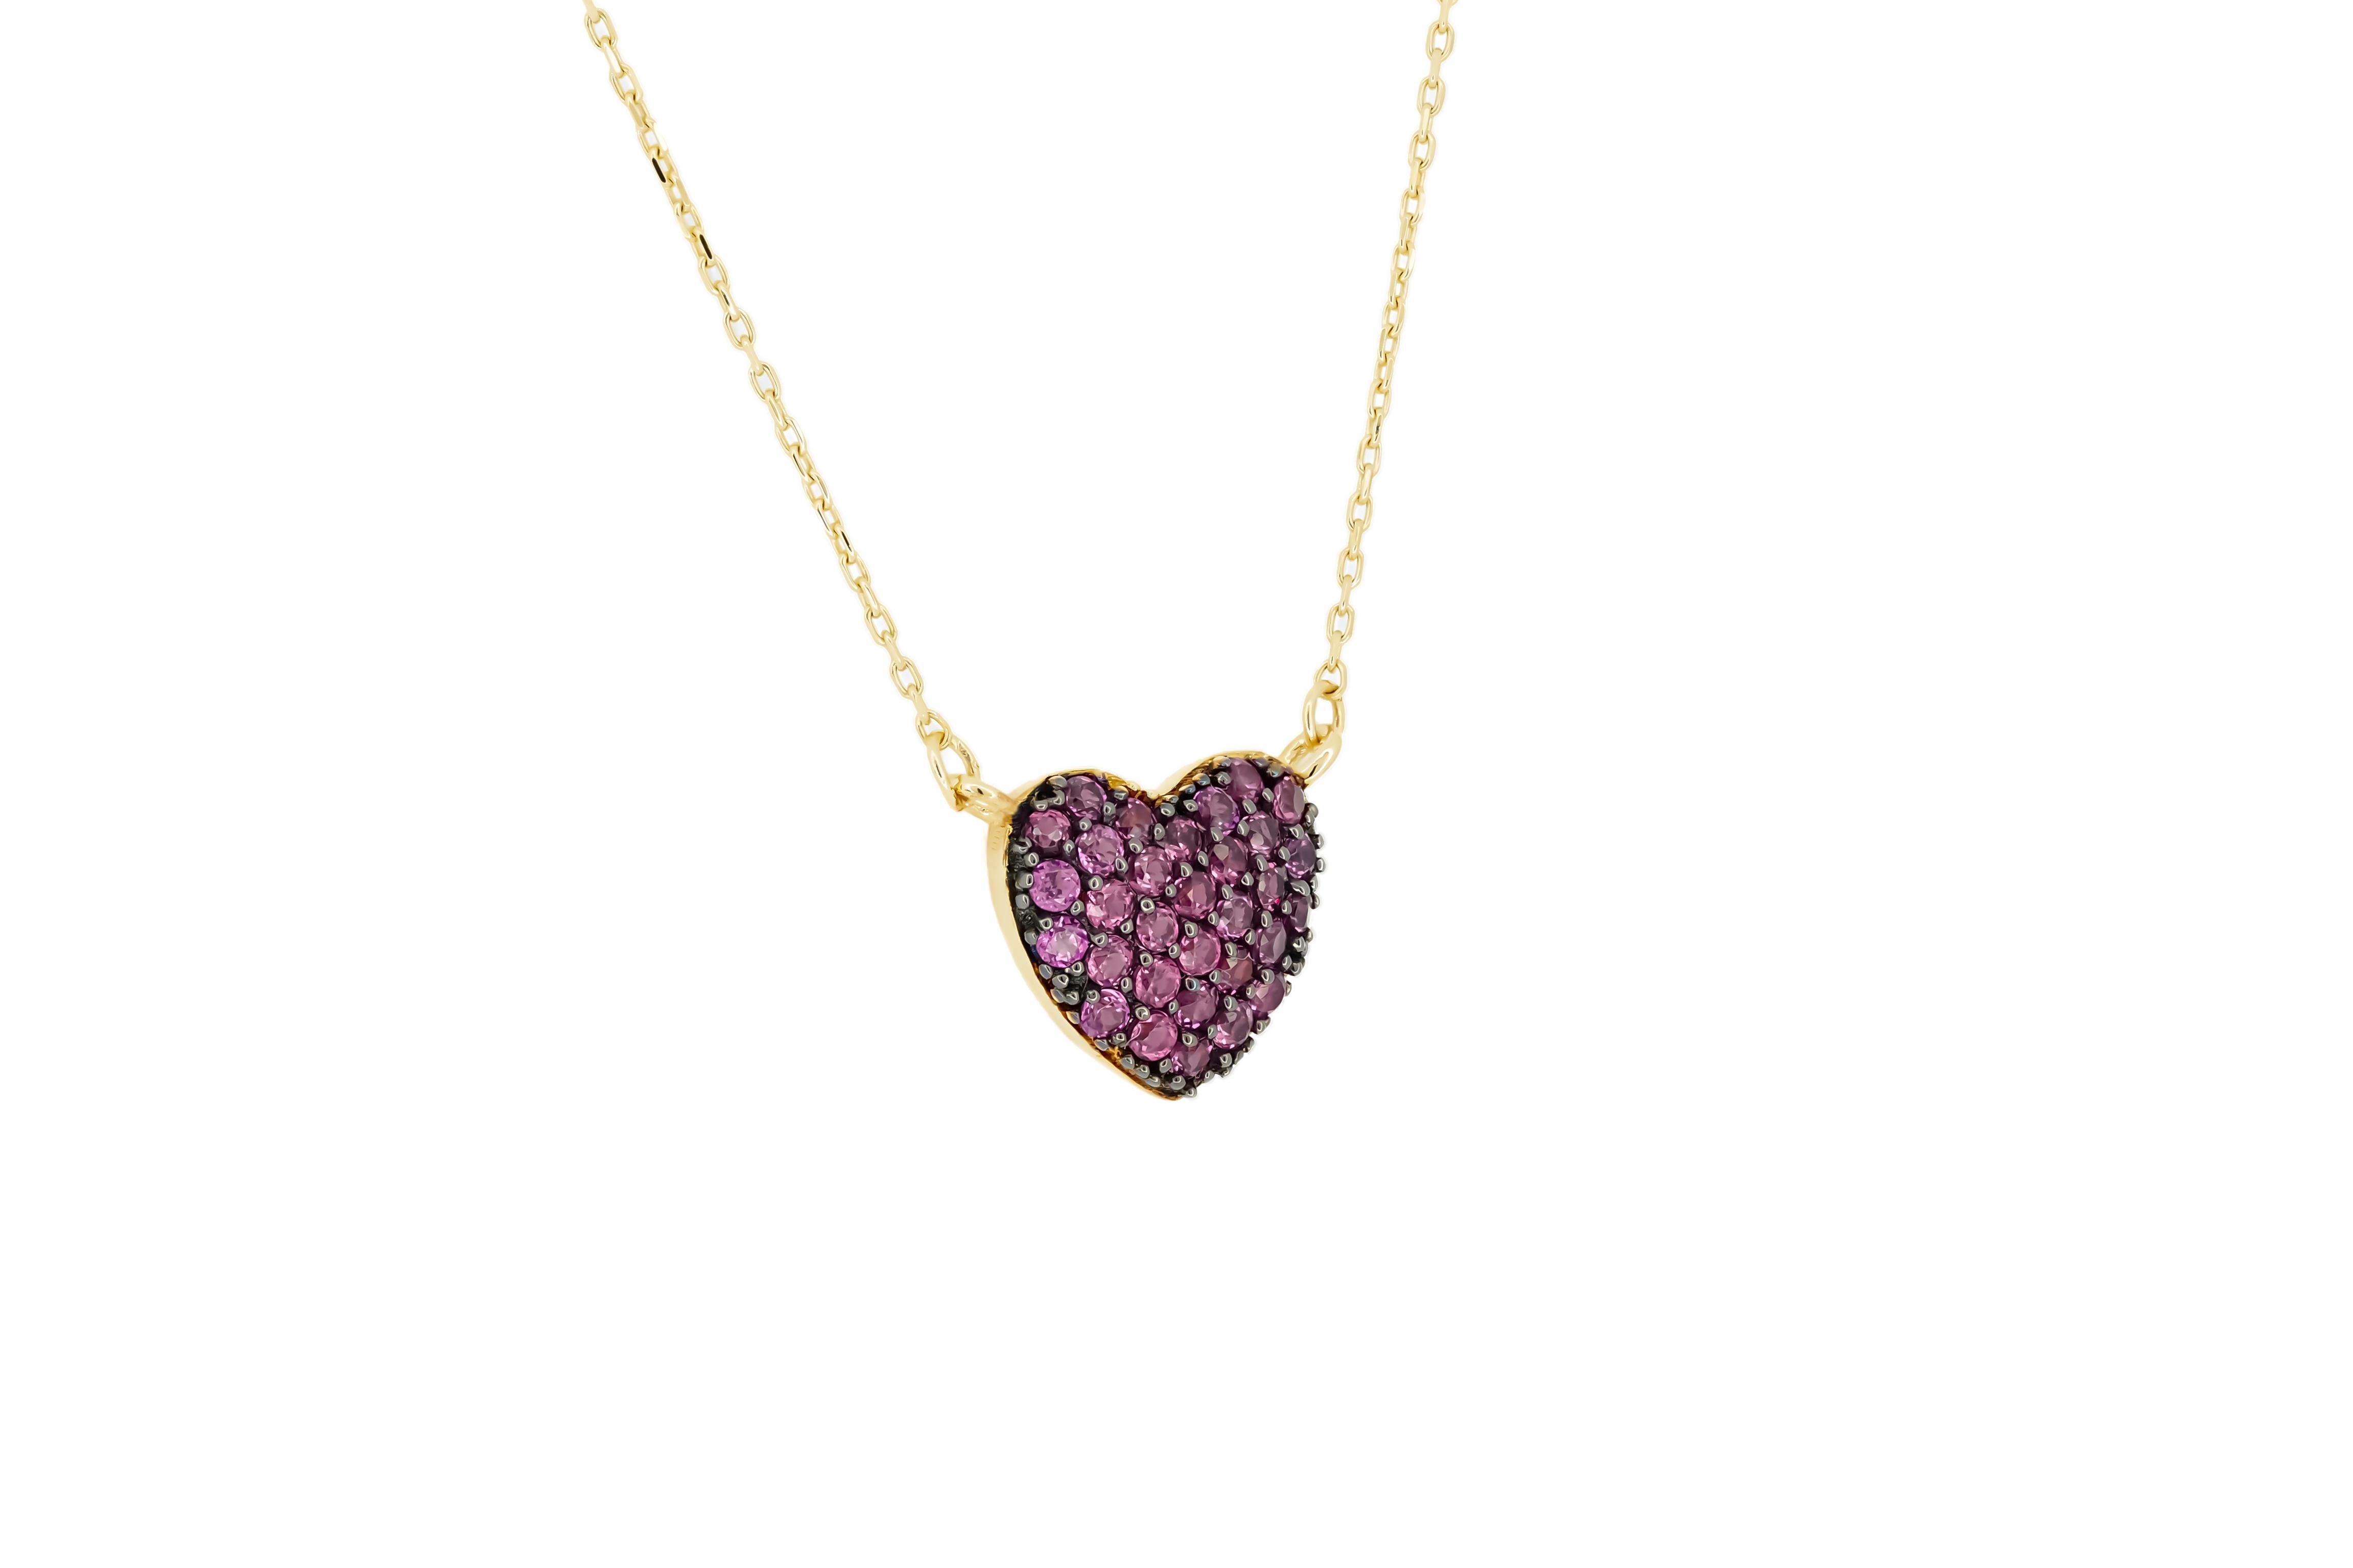 14k Solid Gold heart Pendant necklace. Heart necklace for women. 5